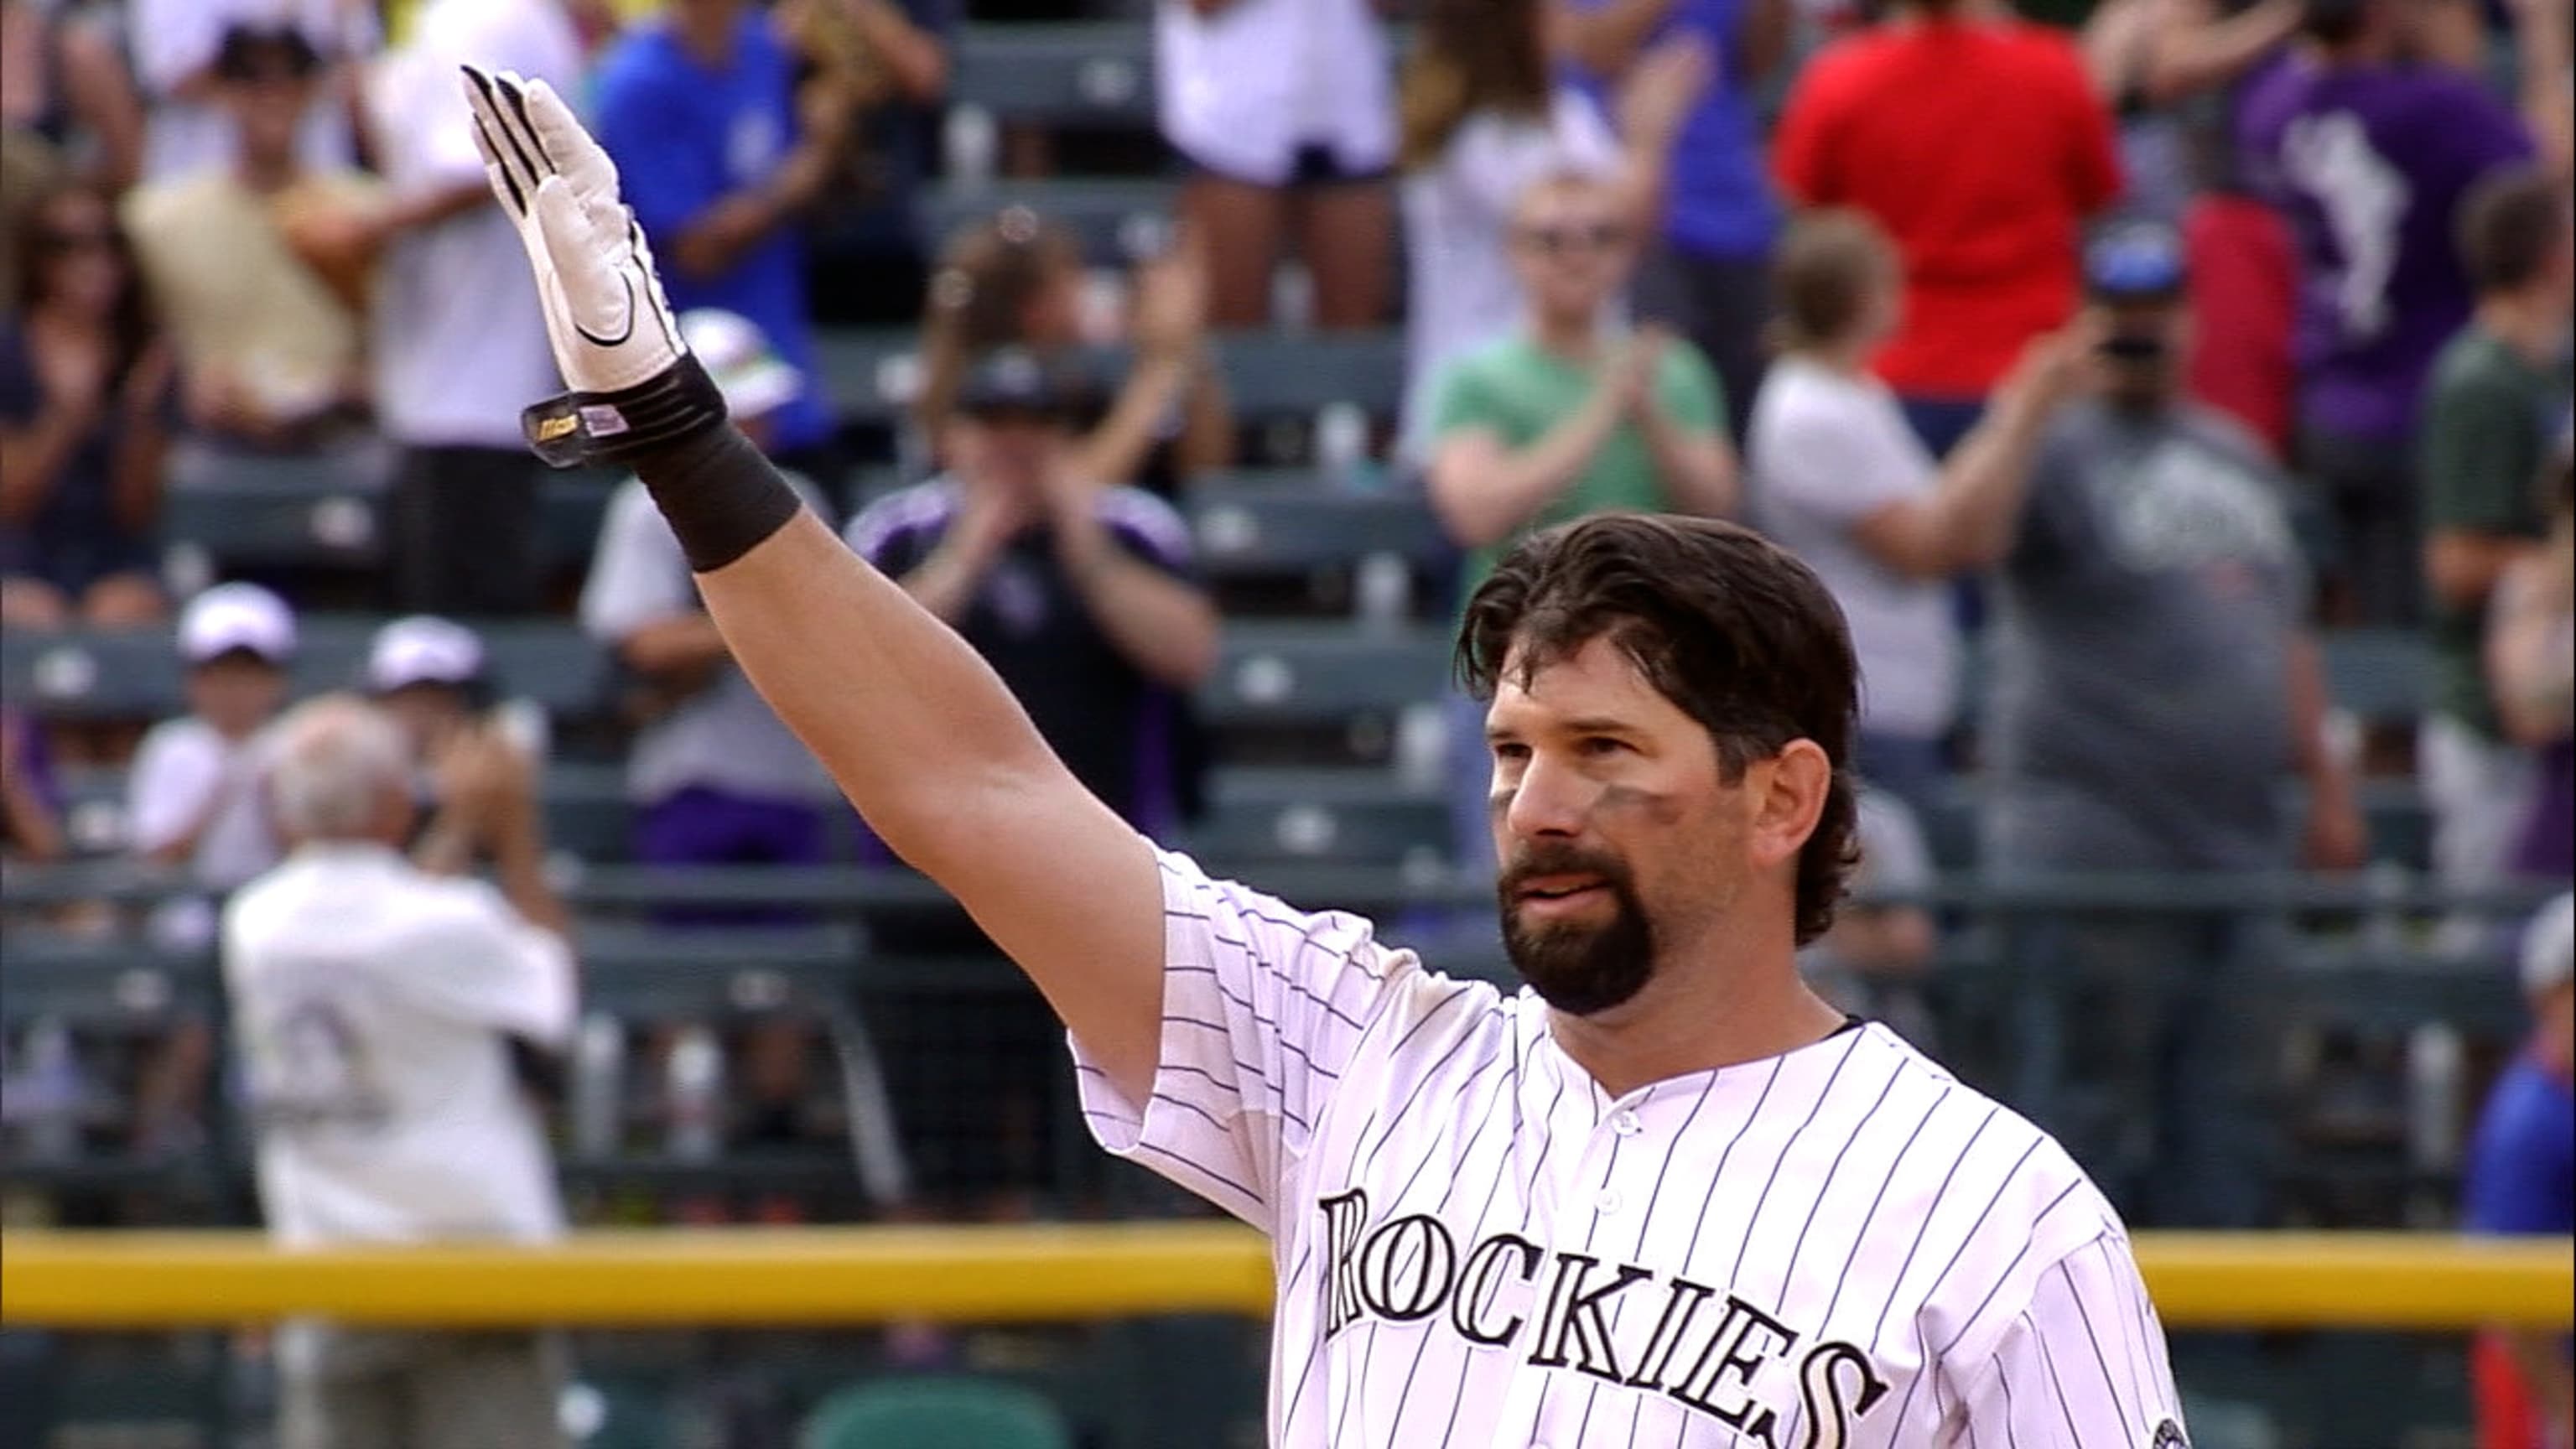 Todd Helton has a case for the Hall of Fame - Beyond the Box Score